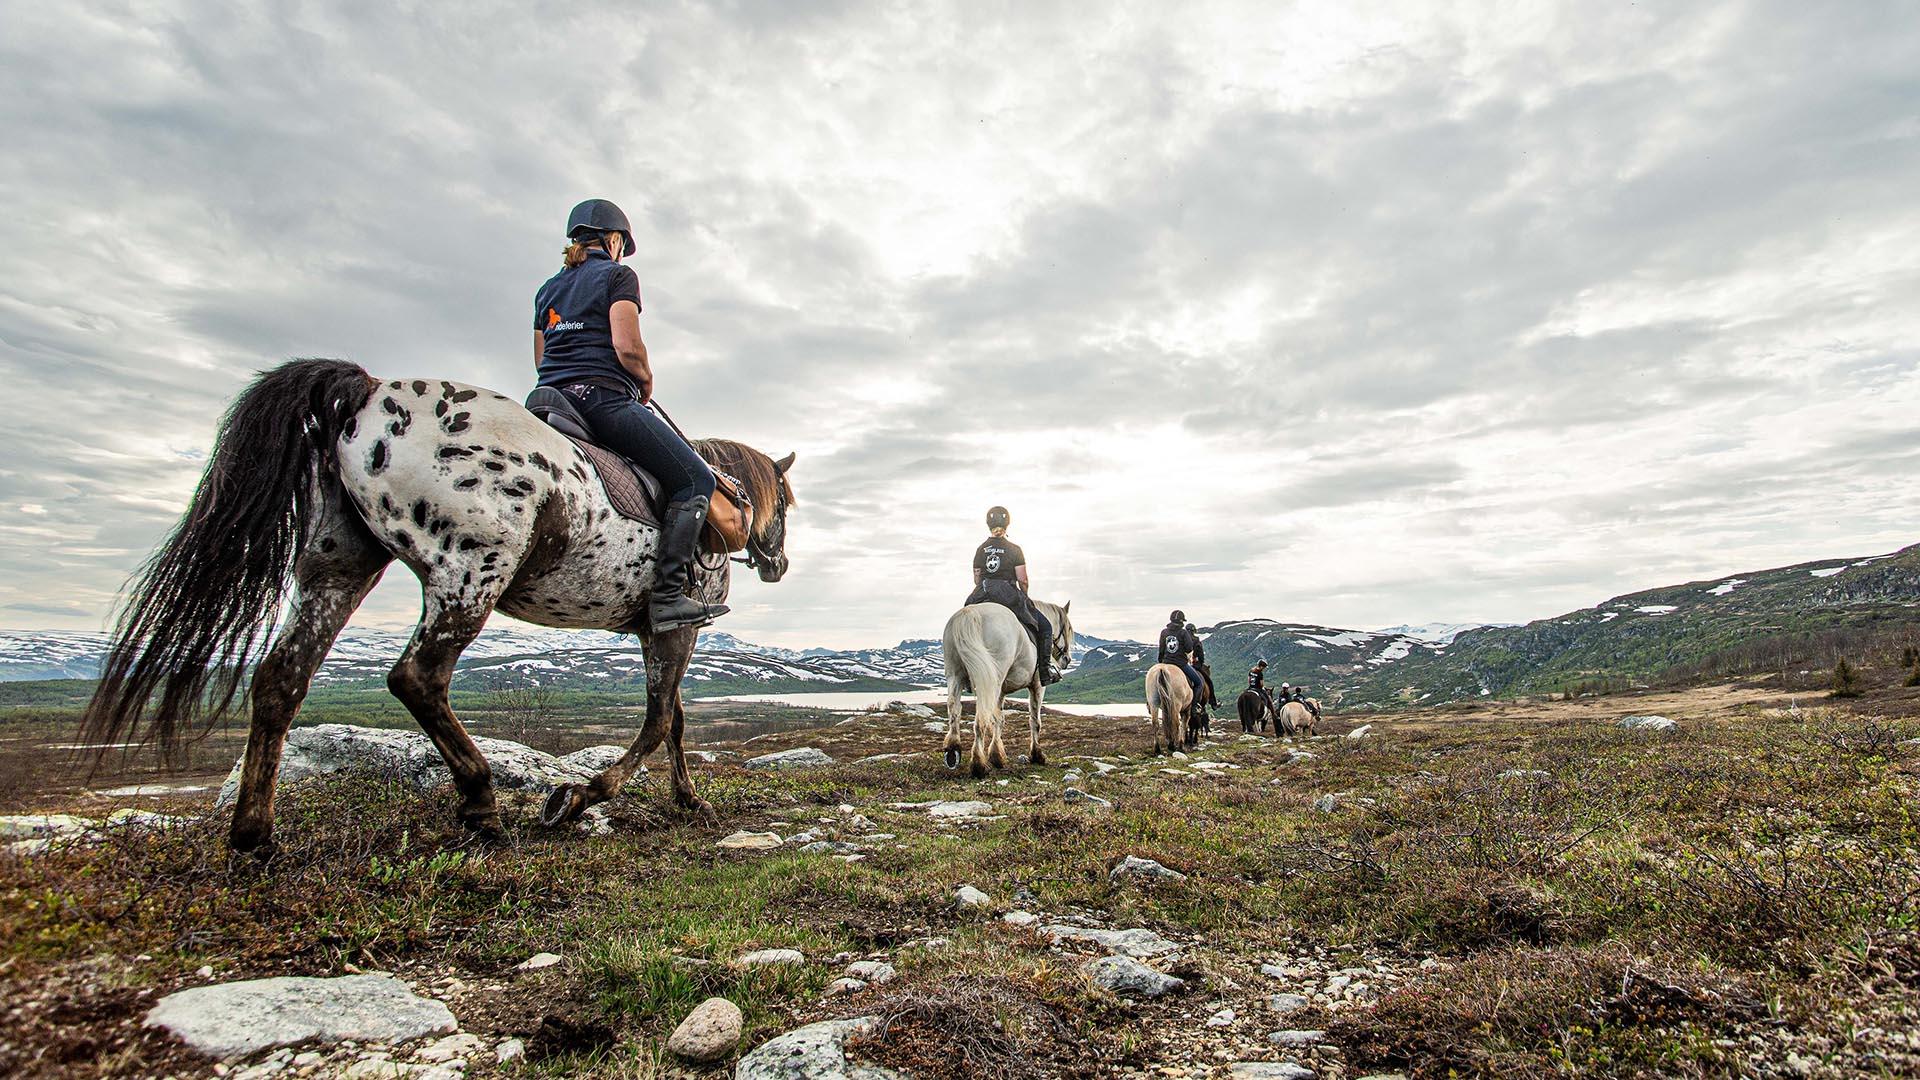 A group og horseback riders in open high mountain landscape. The closest horse is white with many dark dots.